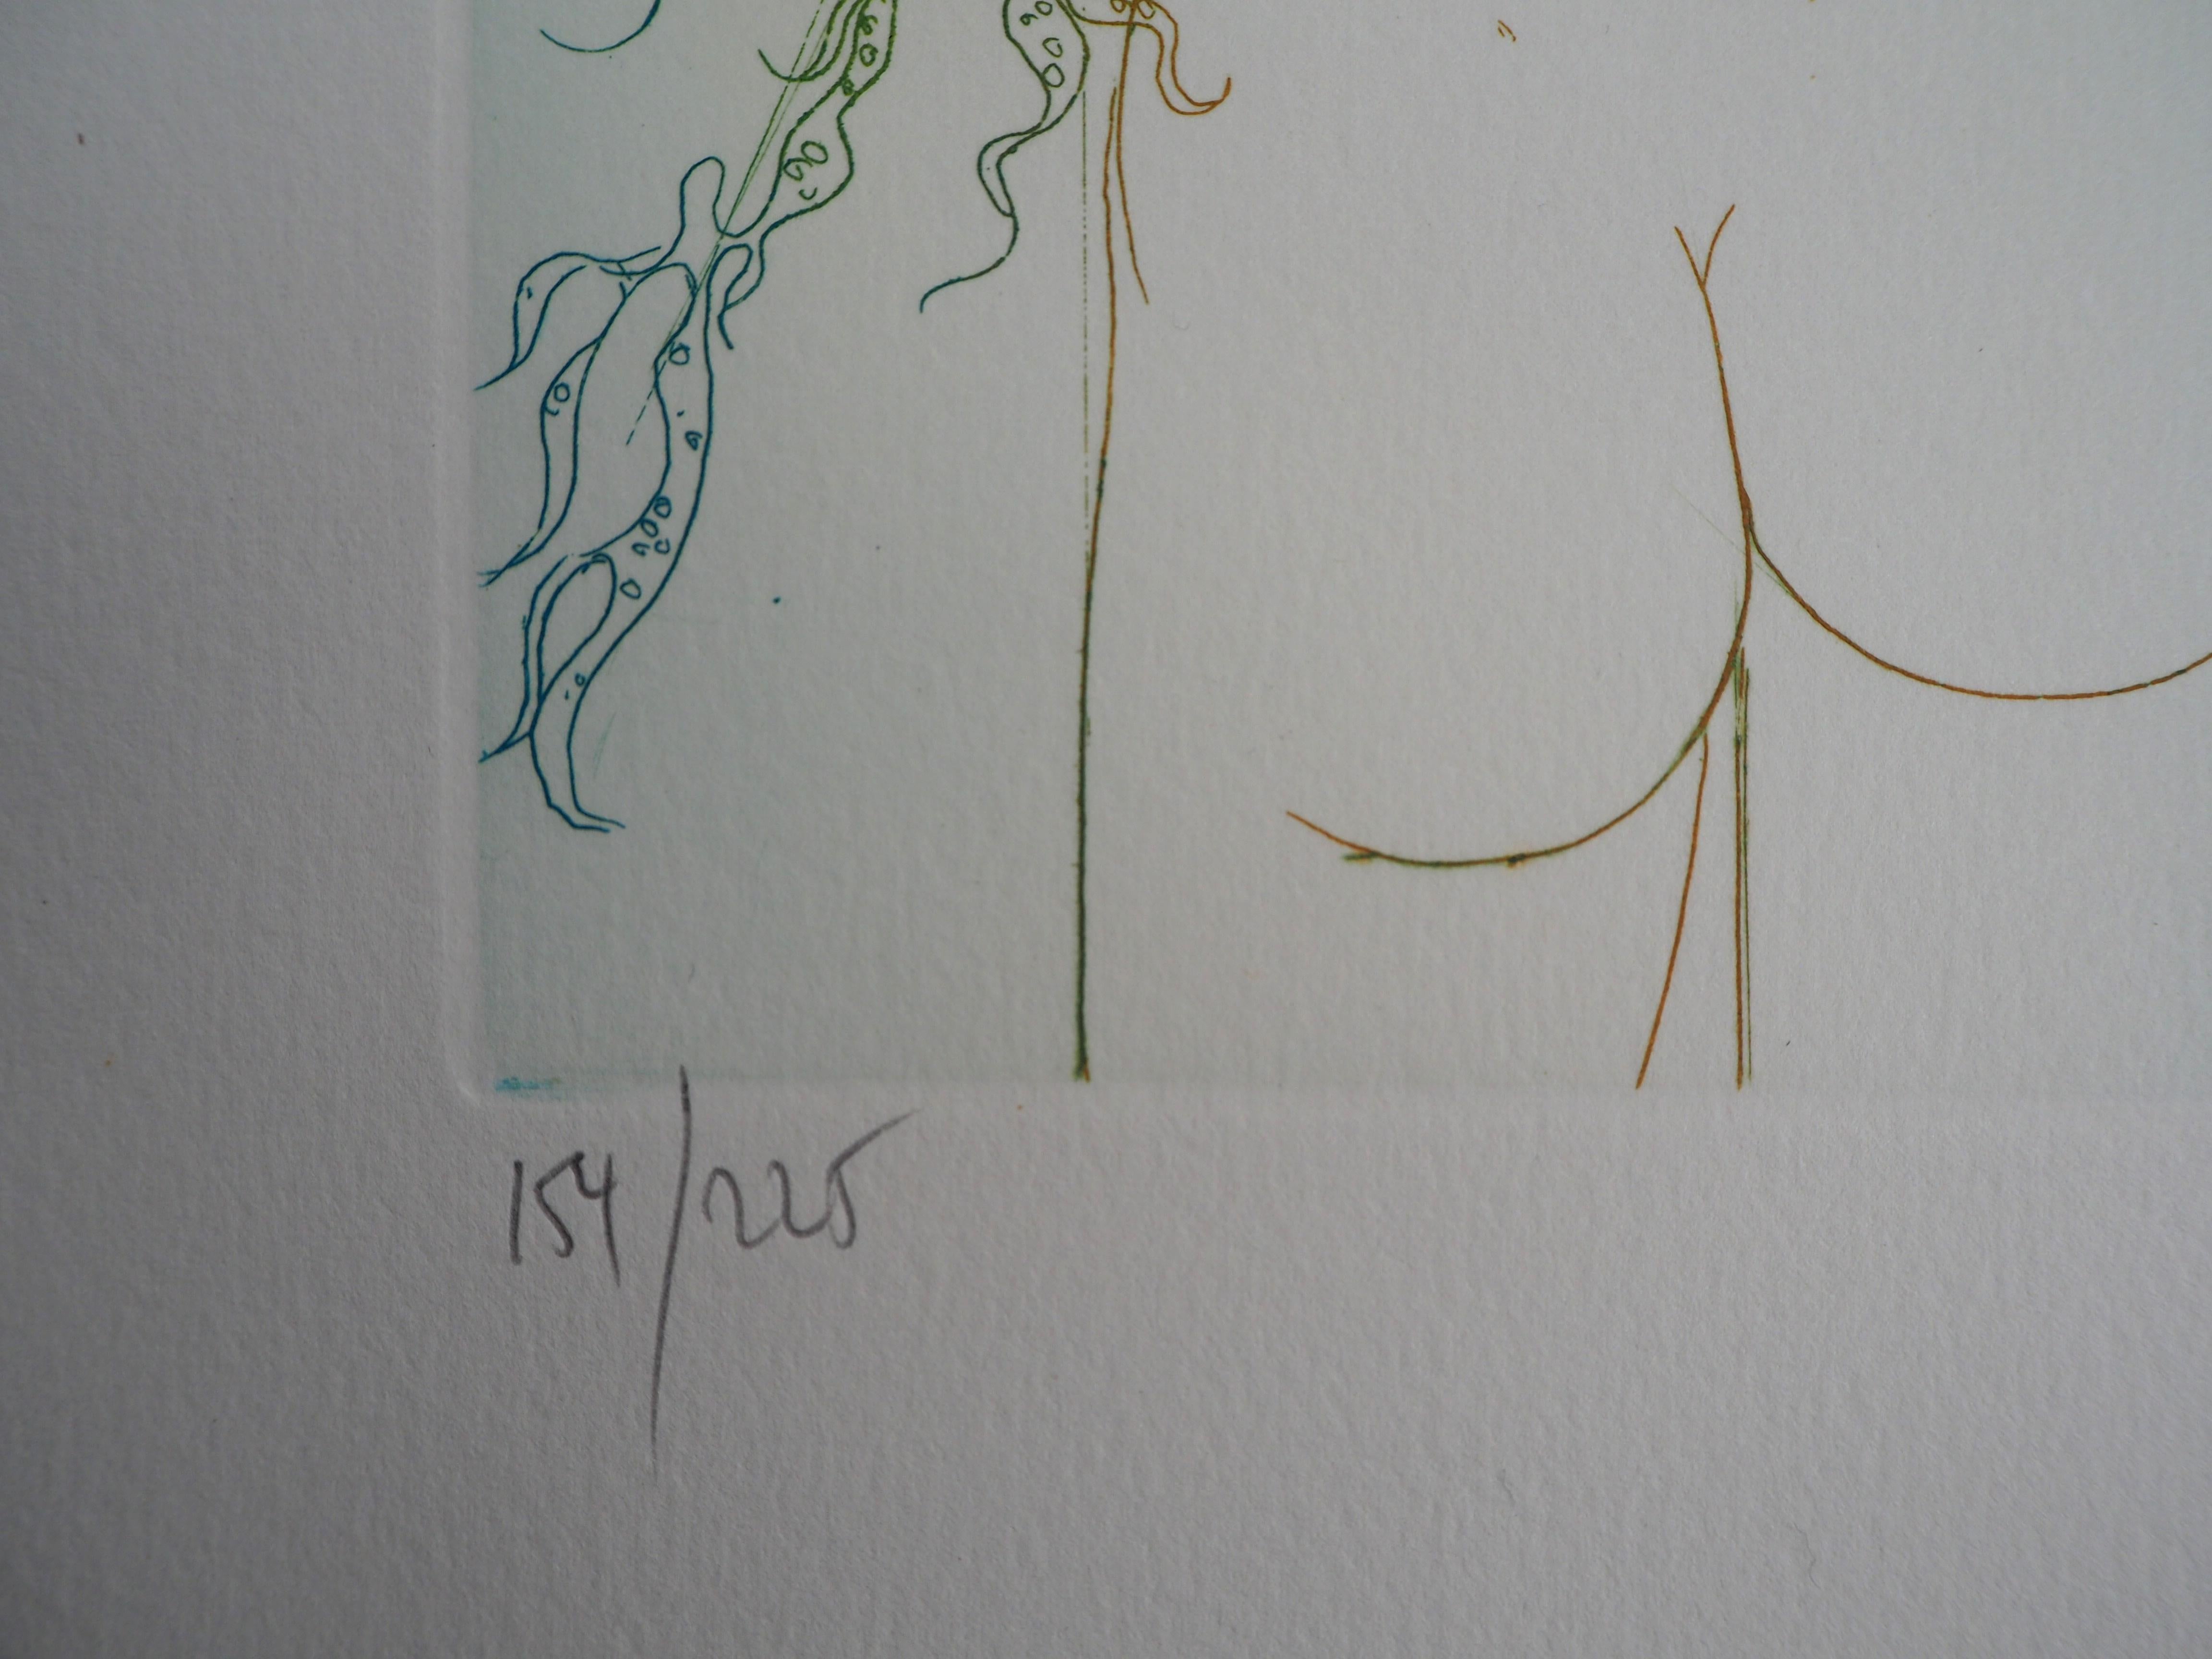 Summer : Nude Model with Seagulls - Original Etching, Handsigned - Modern Print by Jean-Baptiste Valadie